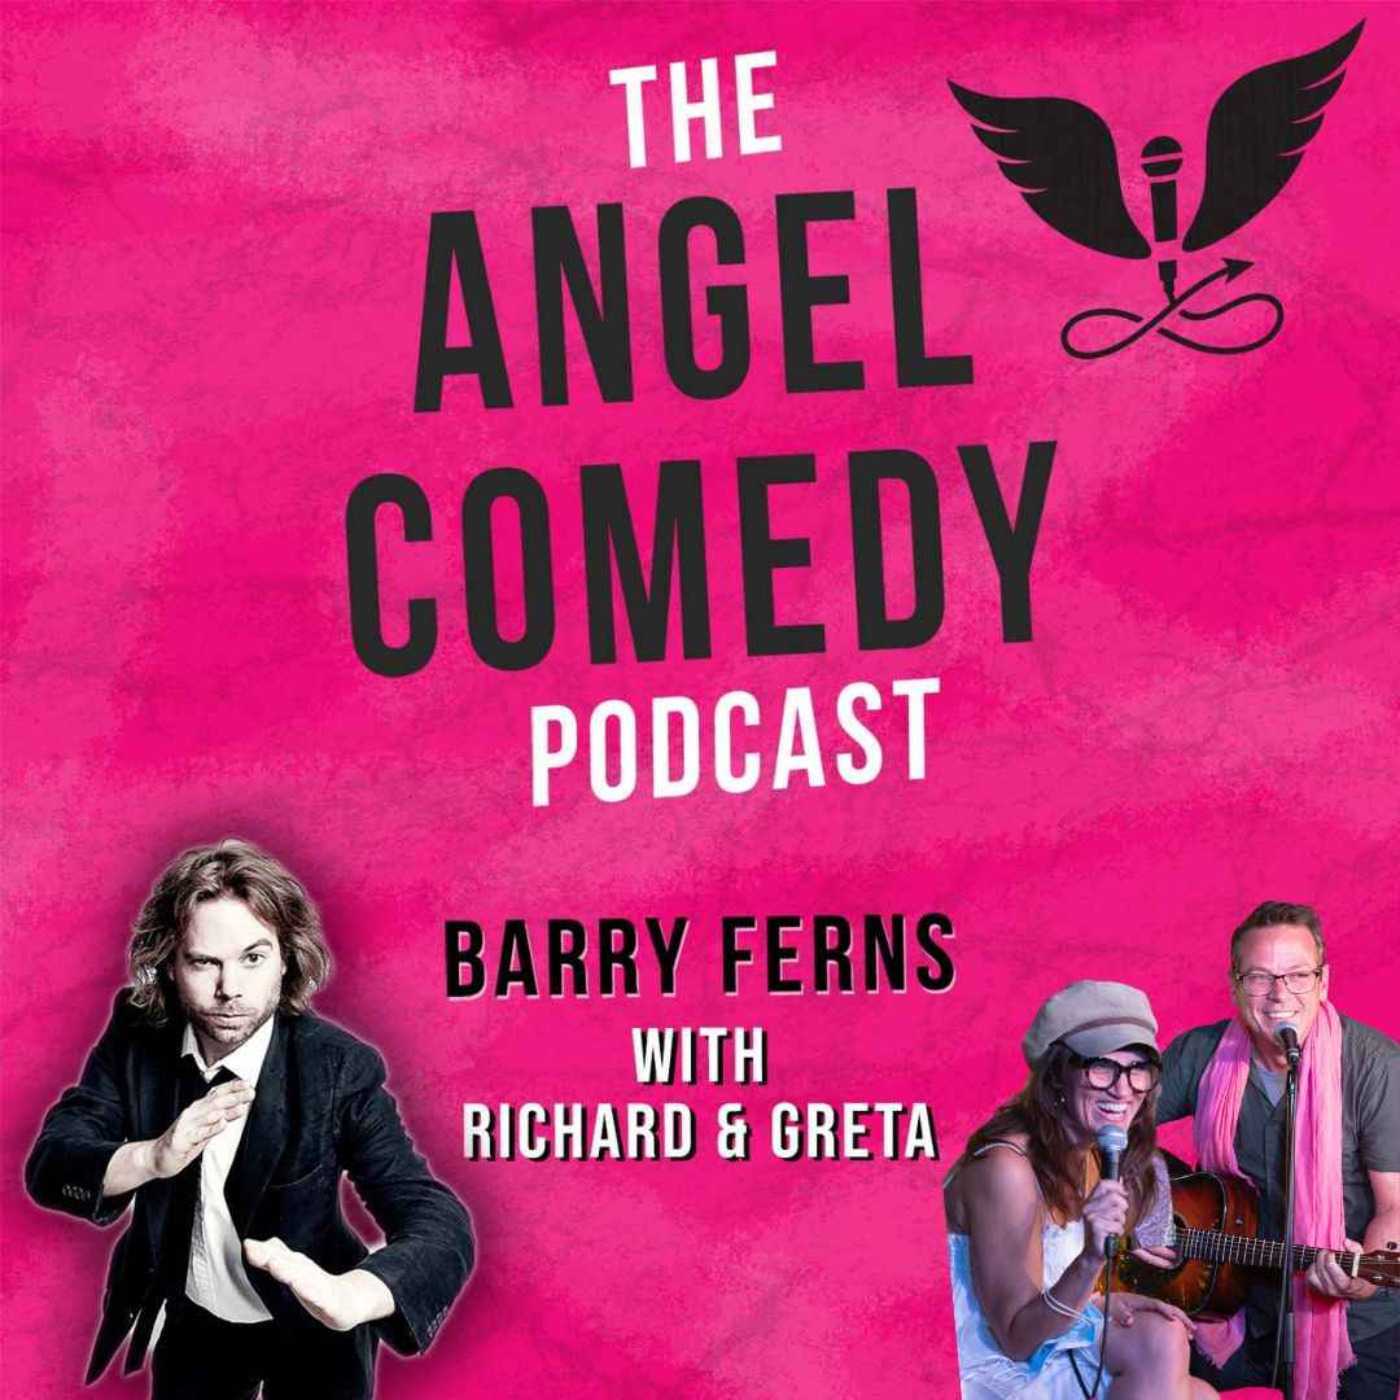 The Angel Comedy Podcast with Richard and Greta